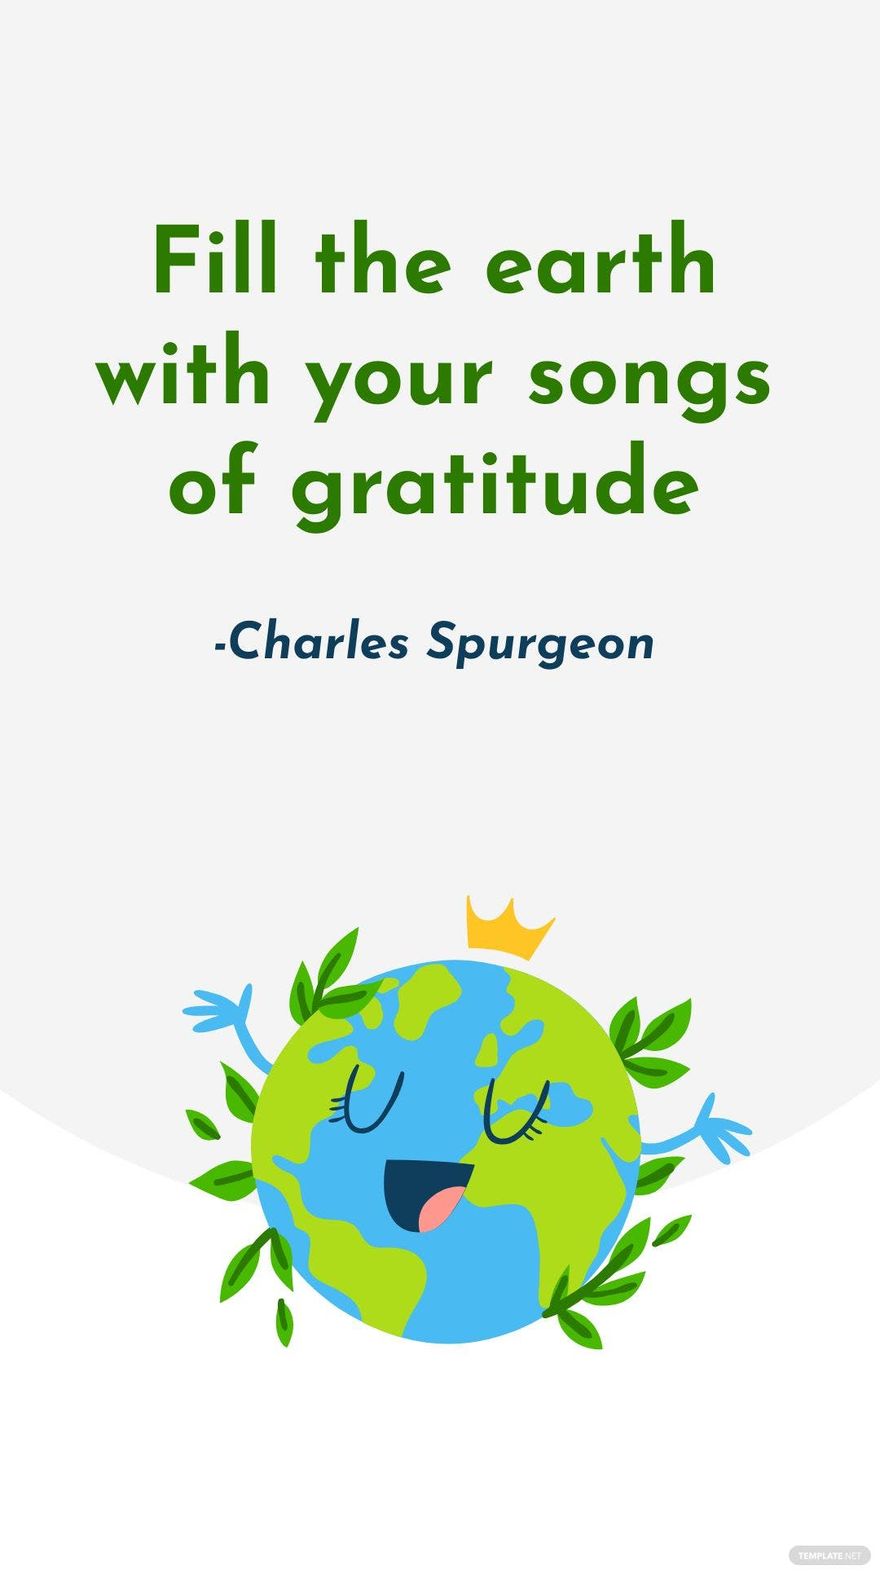 Charles Spurgeon - Fill the earth with your songs of gratitude